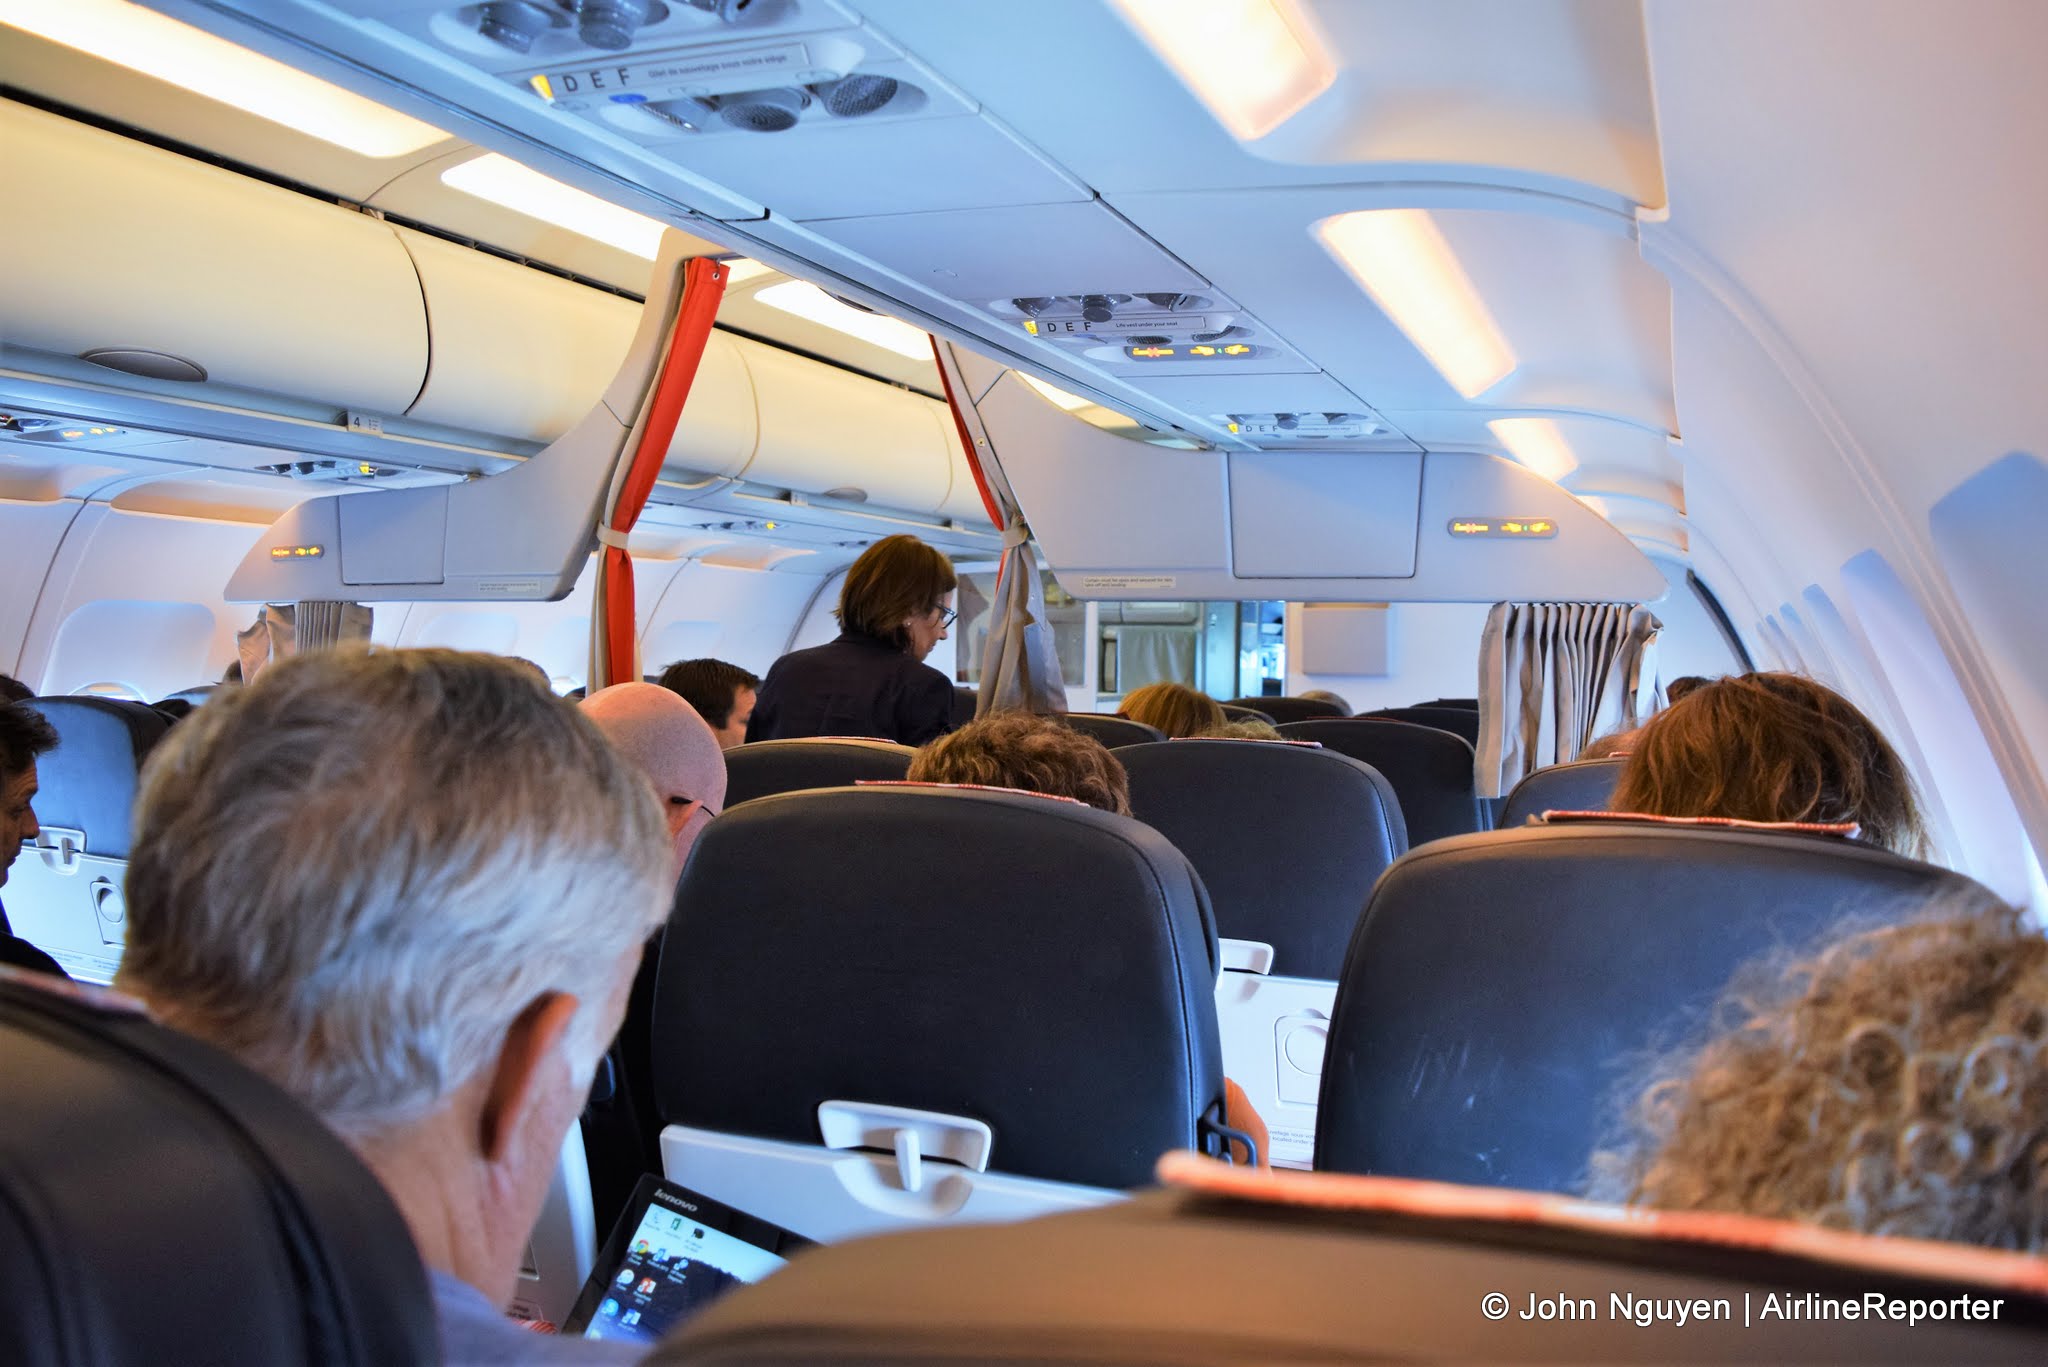 Flying Economy On An Air France Airbus A319 Airlinereporter